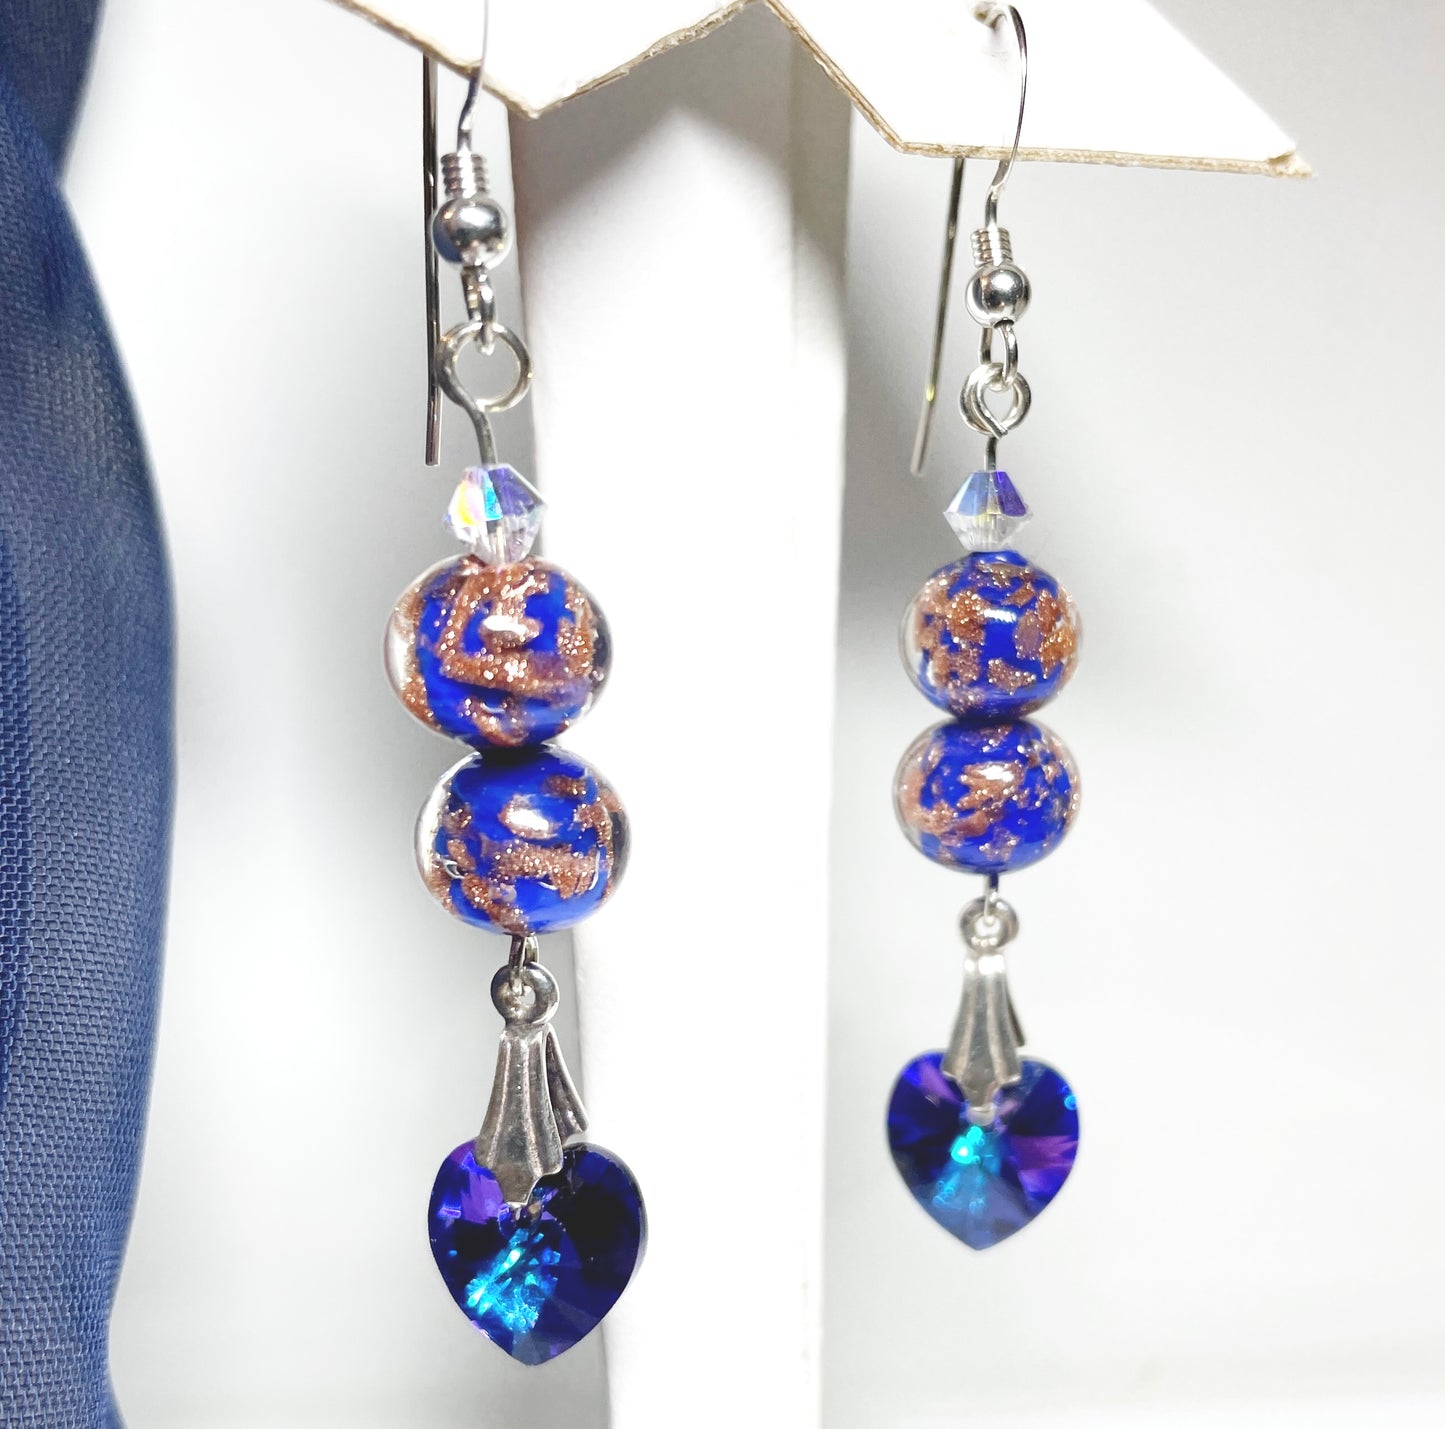 Shimmering blue crystal and Murano glass drop earrings